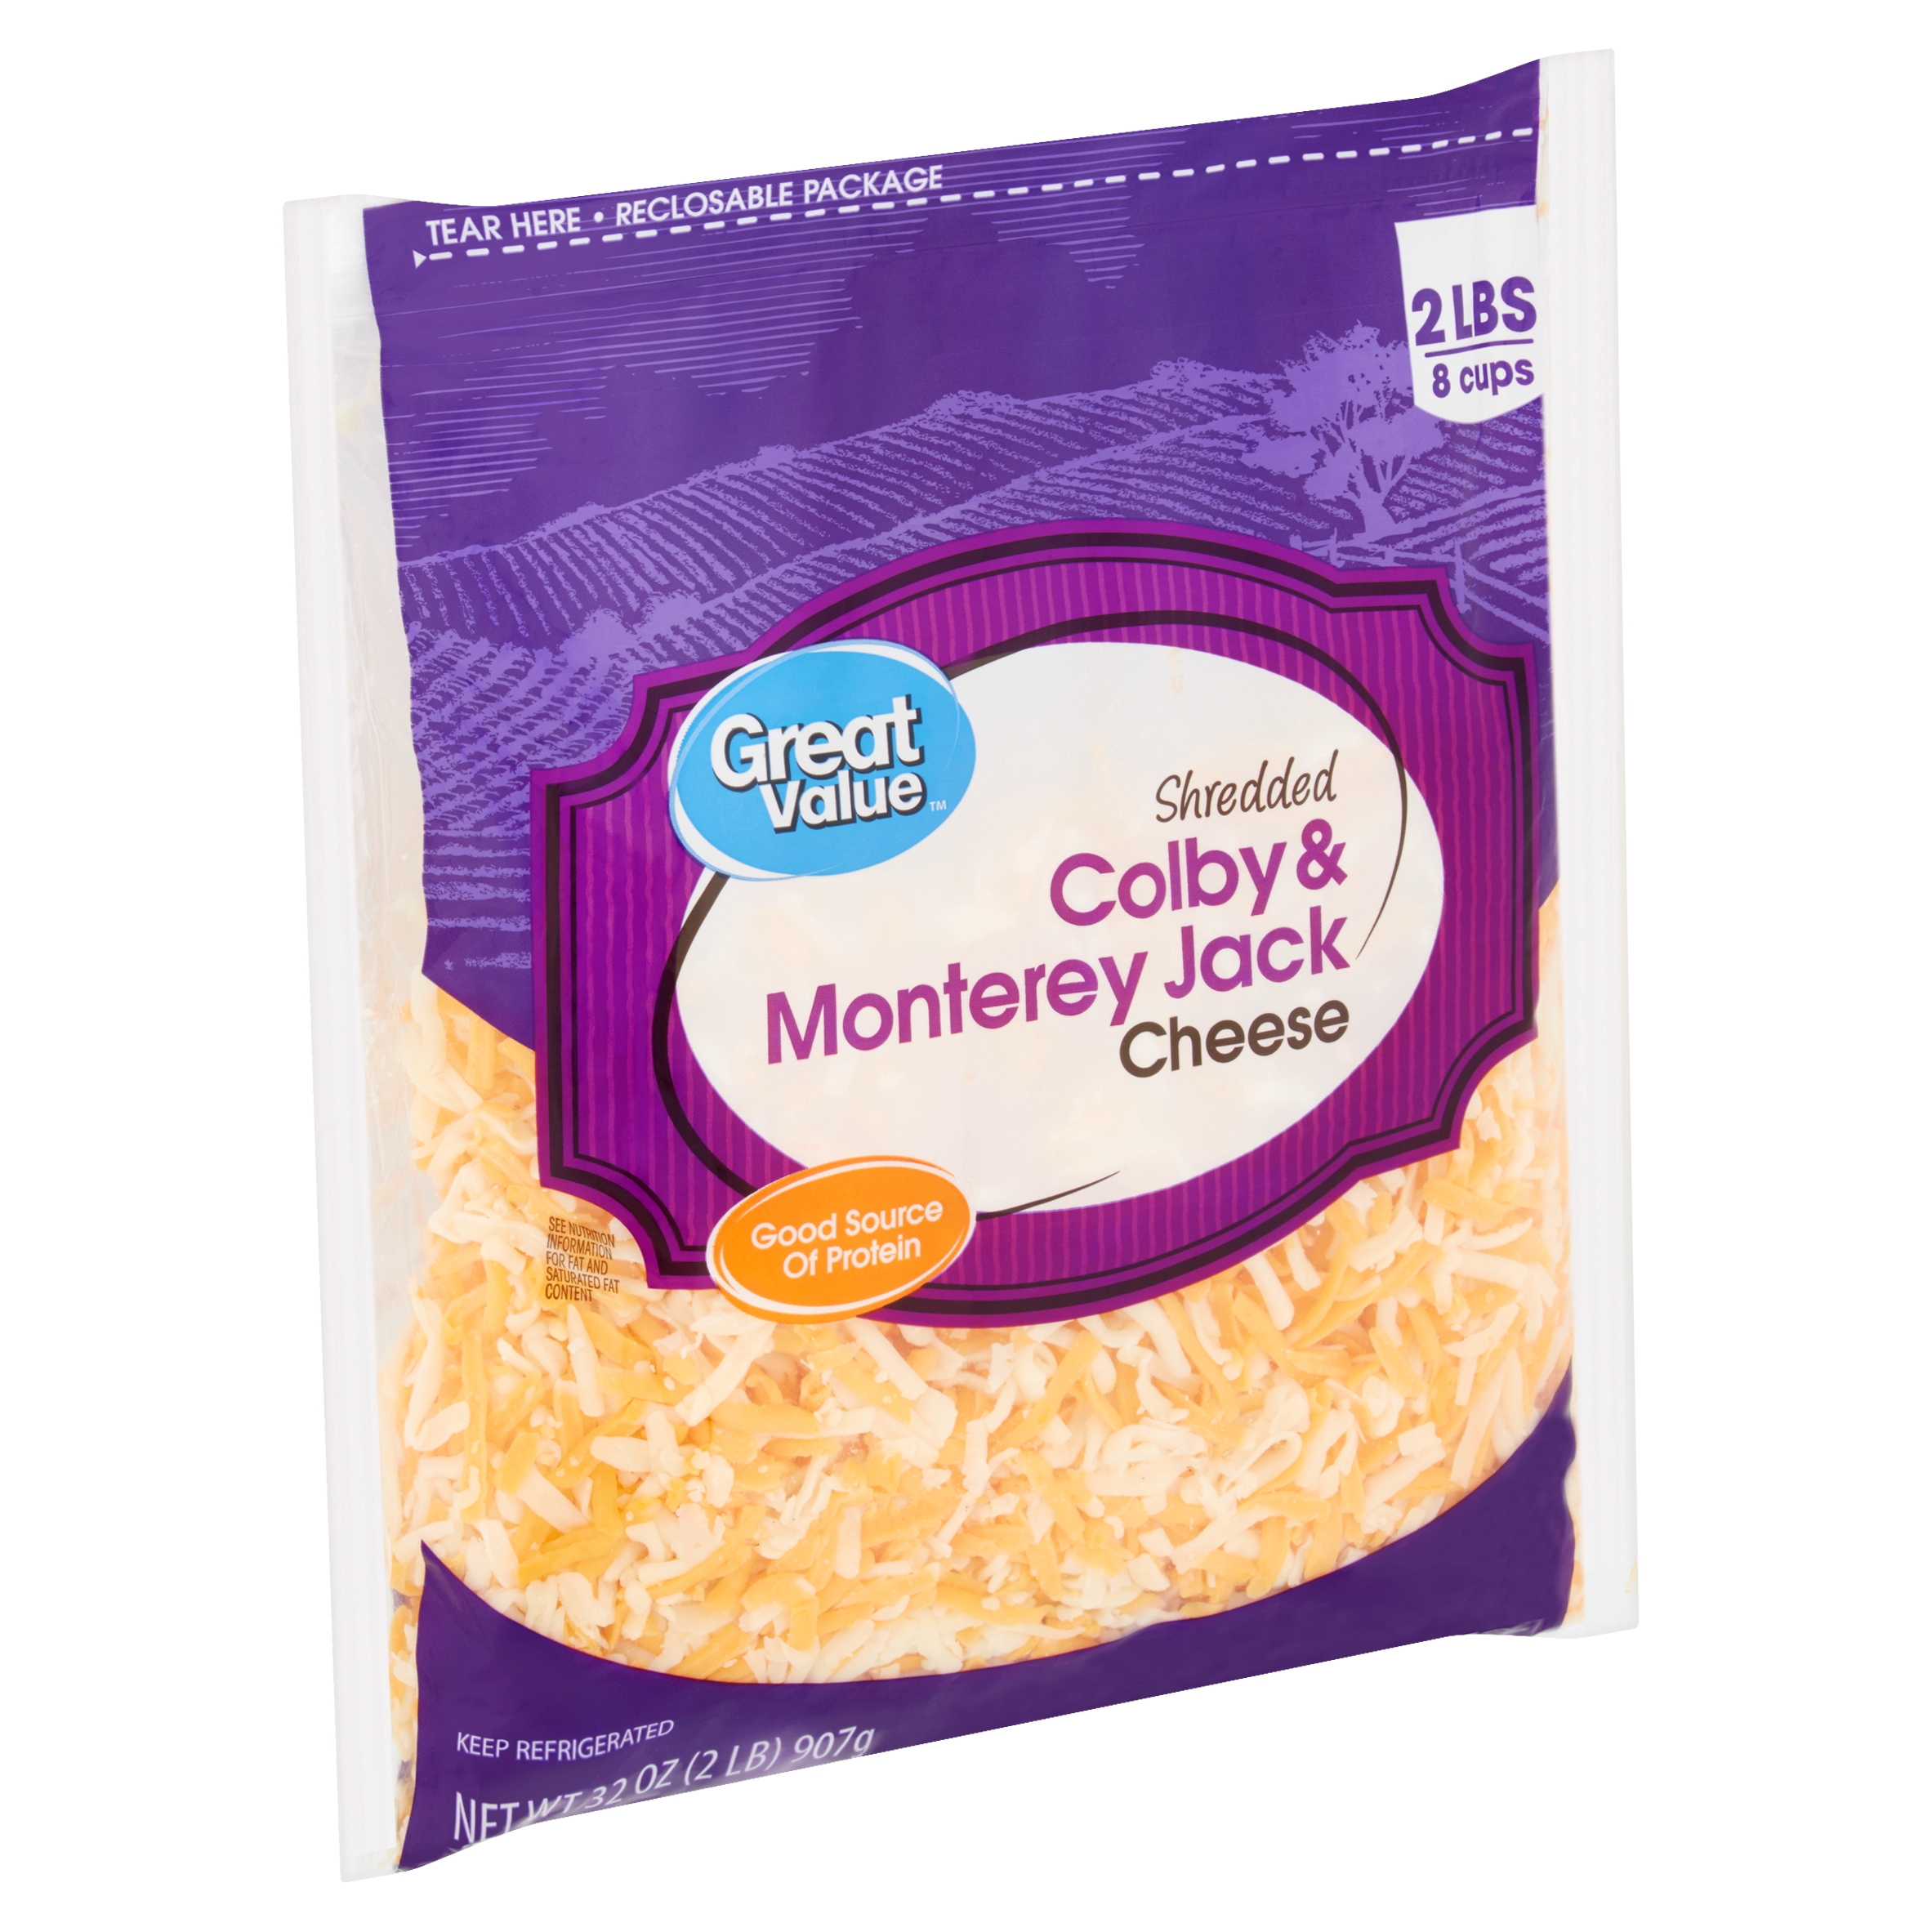 Great Value Shredded Colby & Monterey Jack Cheese, 32 Oz Image